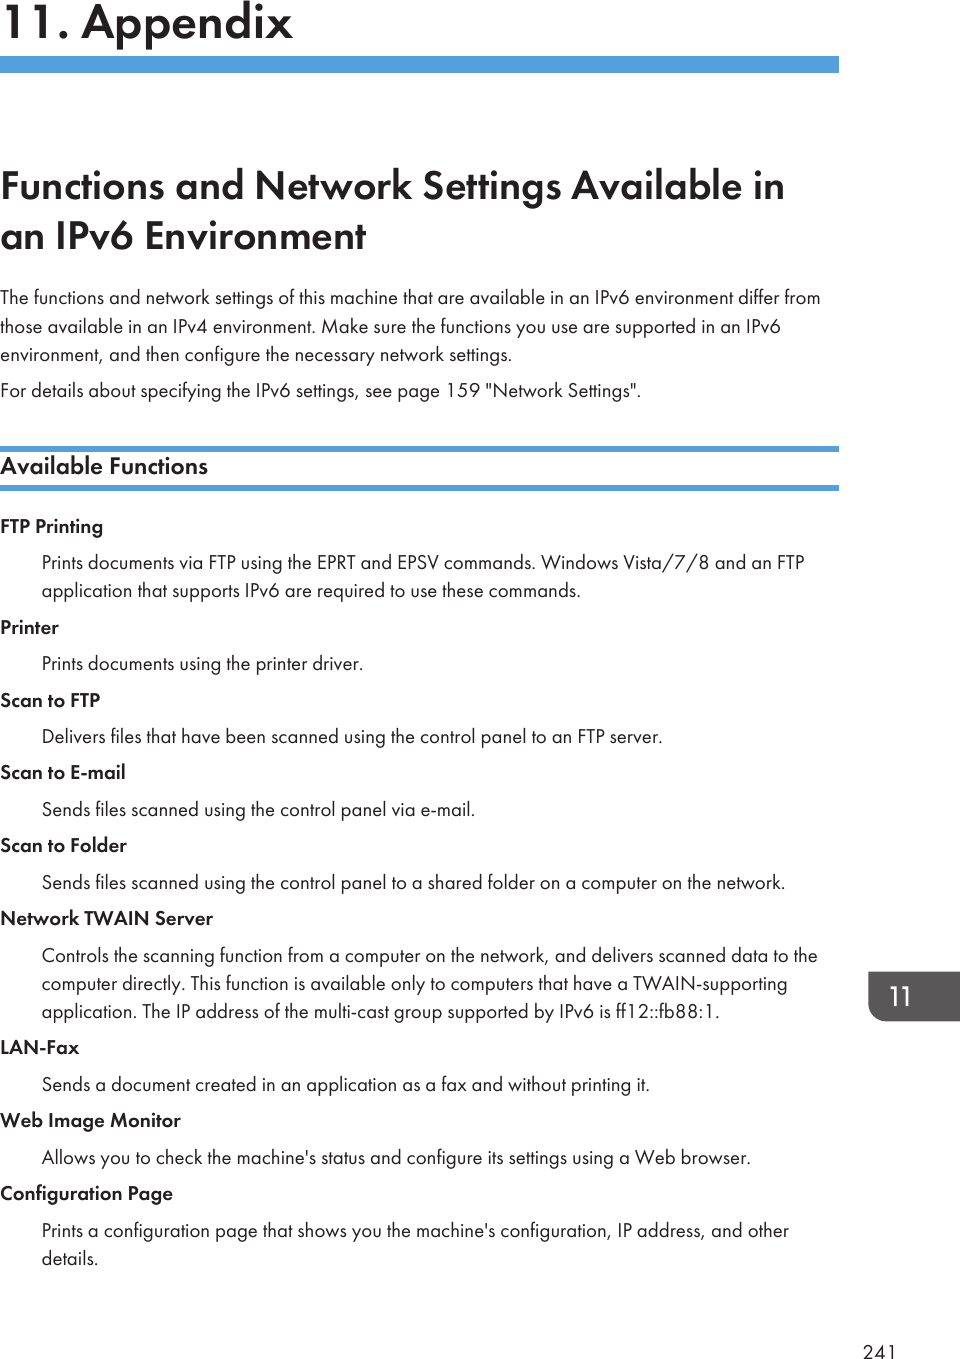 11. AppendixFunctions and Network Settings Available inan IPv6 EnvironmentThe functions and network settings of this machine that are available in an IPv6 environment differ fromthose available in an IPv4 environment. Make sure the functions you use are supported in an IPv6environment, and then configure the necessary network settings.For details about specifying the IPv6 settings, see page 159 &quot;Network Settings&quot;.Available FunctionsFTP PrintingPrints documents via FTP using the EPRT and EPSV commands. Windows Vista/7/8 and an FTPapplication that supports IPv6 are required to use these commands.PrinterPrints documents using the printer driver.Scan to FTPDelivers files that have been scanned using the control panel to an FTP server.Scan to E-mailSends files scanned using the control panel via e-mail.Scan to FolderSends files scanned using the control panel to a shared folder on a computer on the network.Network TWAIN ServerControls the scanning function from a computer on the network, and delivers scanned data to thecomputer directly. This function is available only to computers that have a TWAIN-supportingapplication. The IP address of the multi-cast group supported by IPv6 is ff12::fb88:1.LAN-FaxSends a document created in an application as a fax and without printing it.Web Image MonitorAllows you to check the machine&apos;s status and configure its settings using a Web browser.Configuration PagePrints a configuration page that shows you the machine&apos;s configuration, IP address, and otherdetails.241